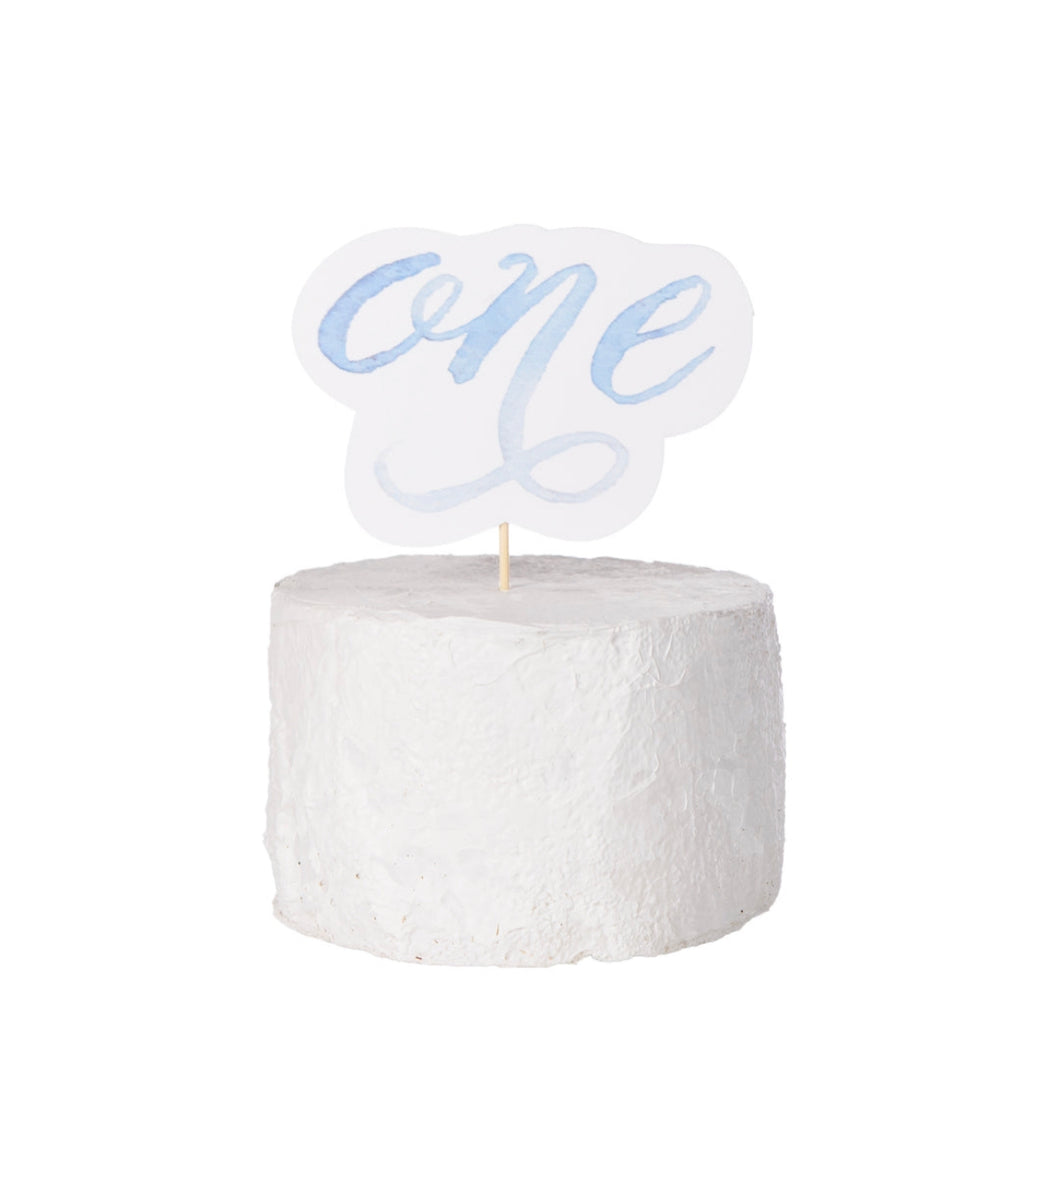 ONE CAKE TOPPER-BLUE